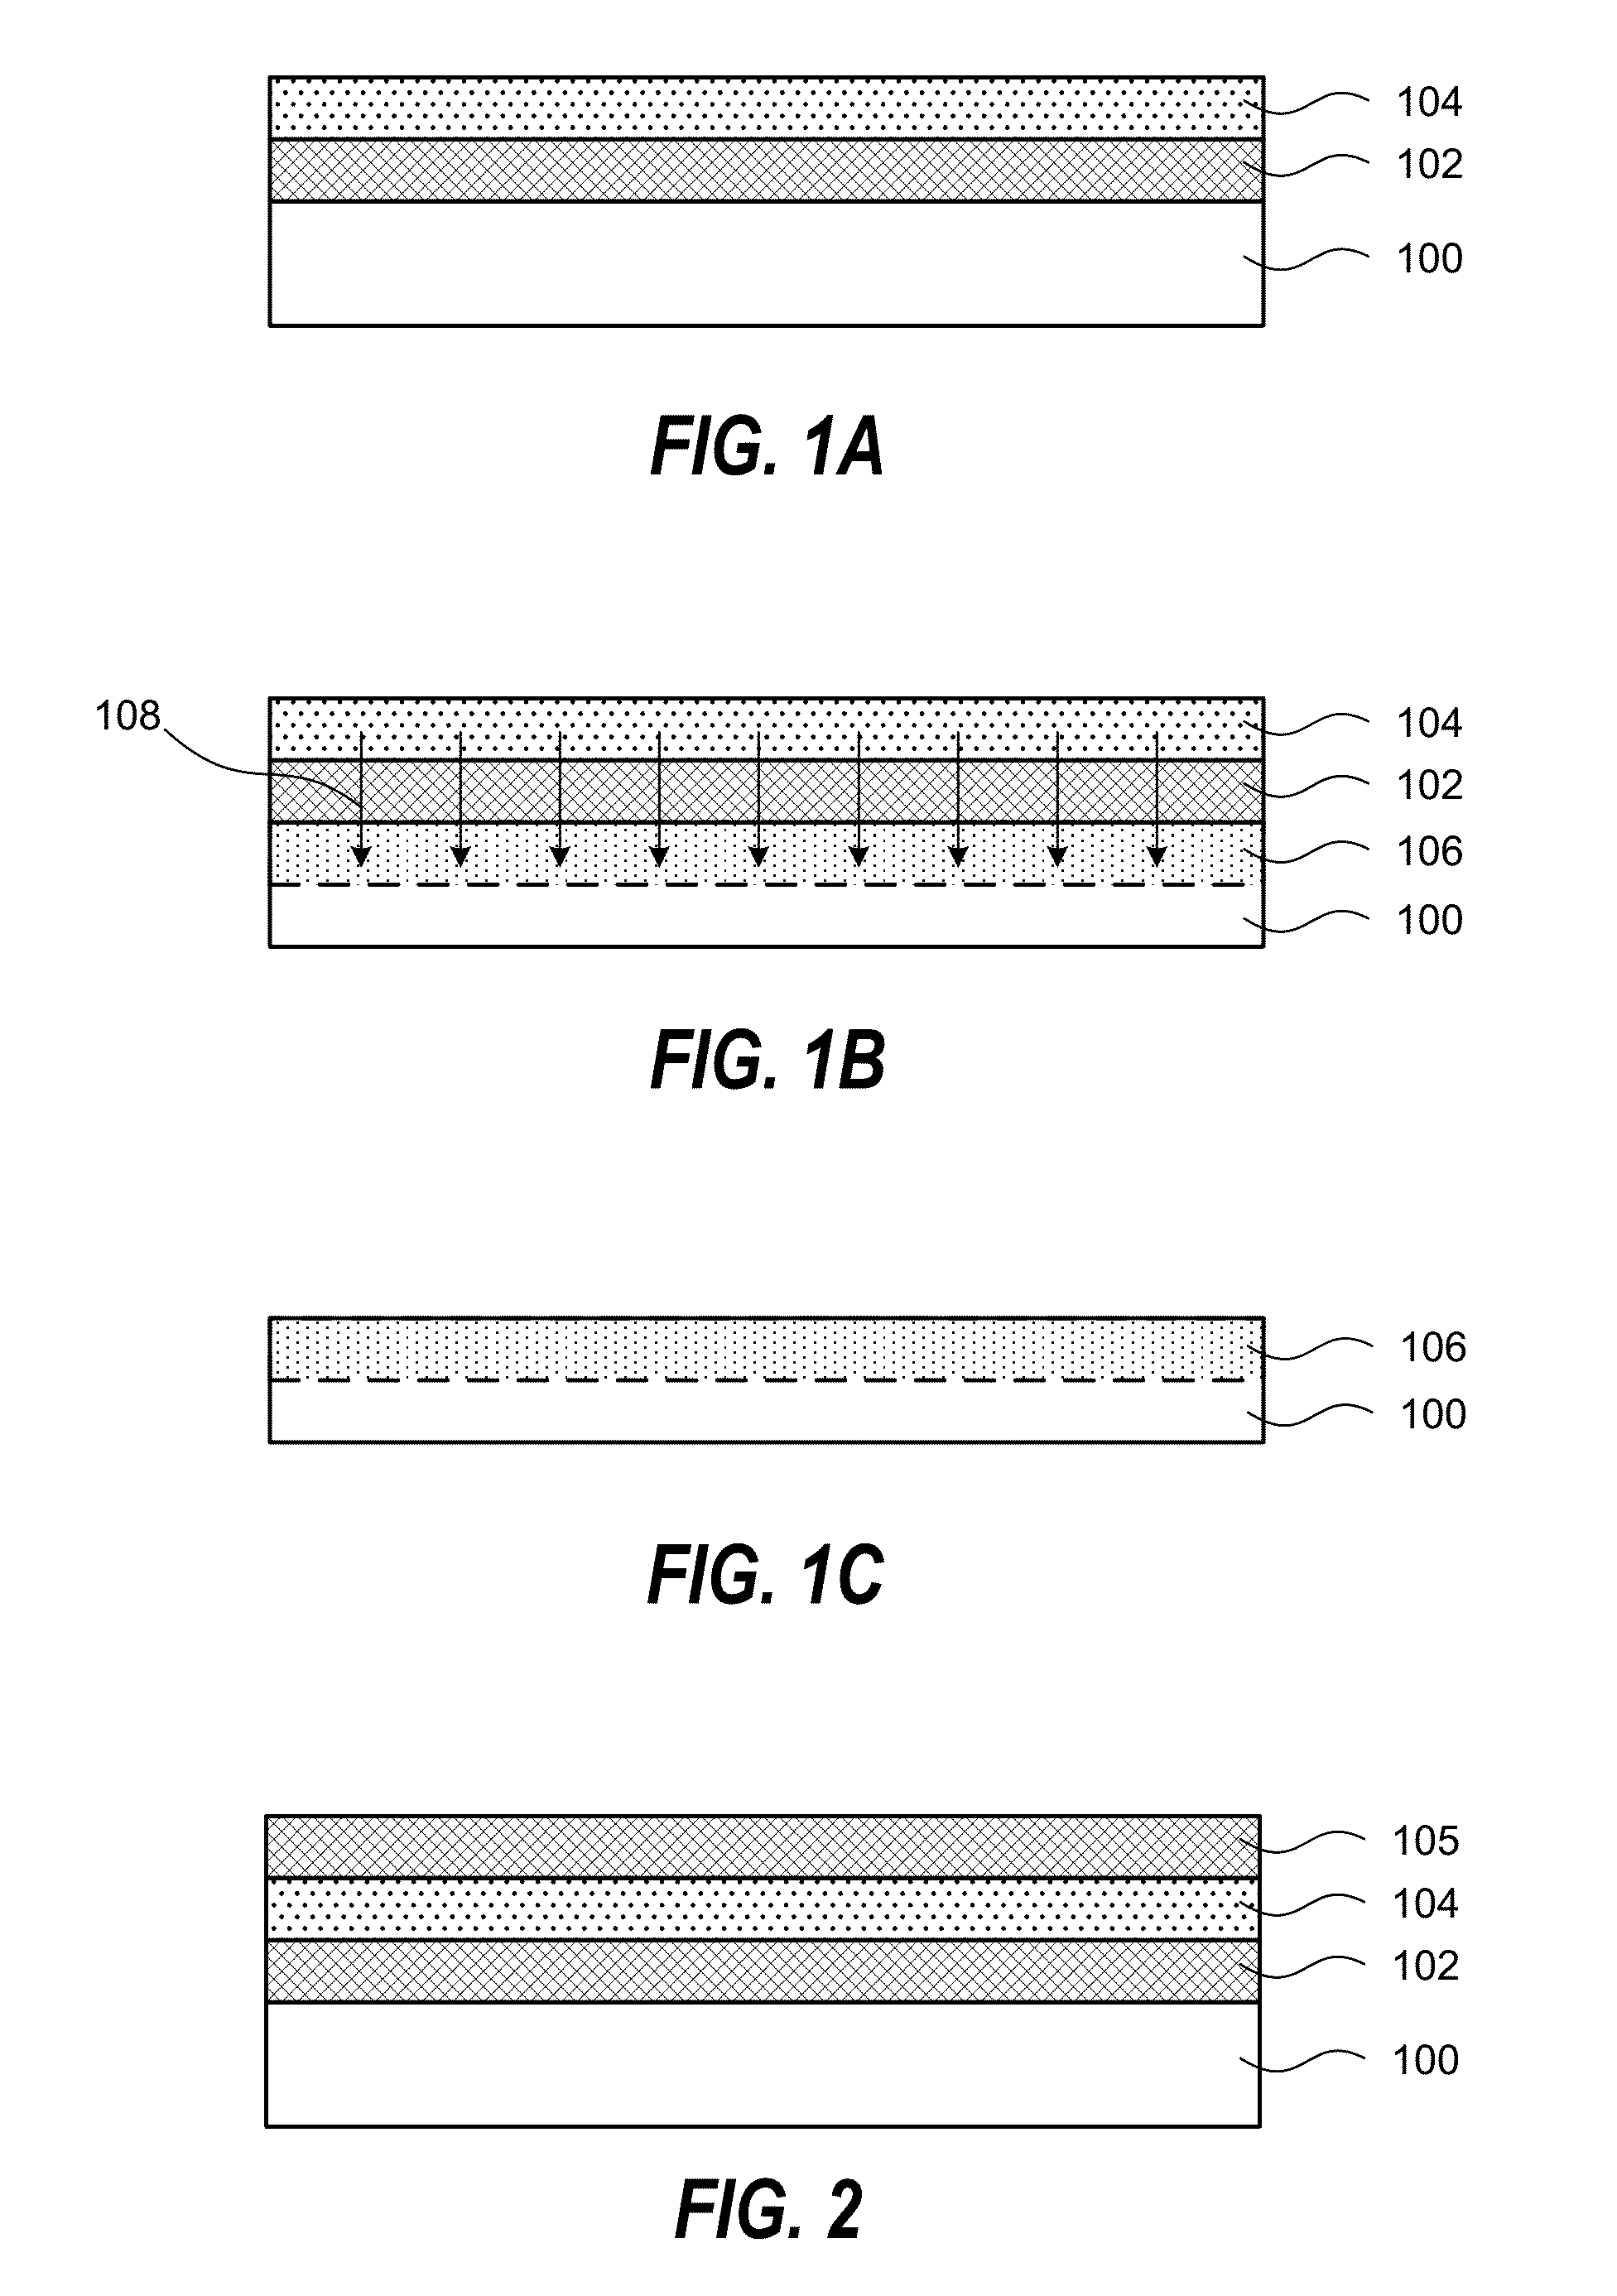 Method of controlling solid phase diffusion of boron dopants to form ultra-shallow doping regions